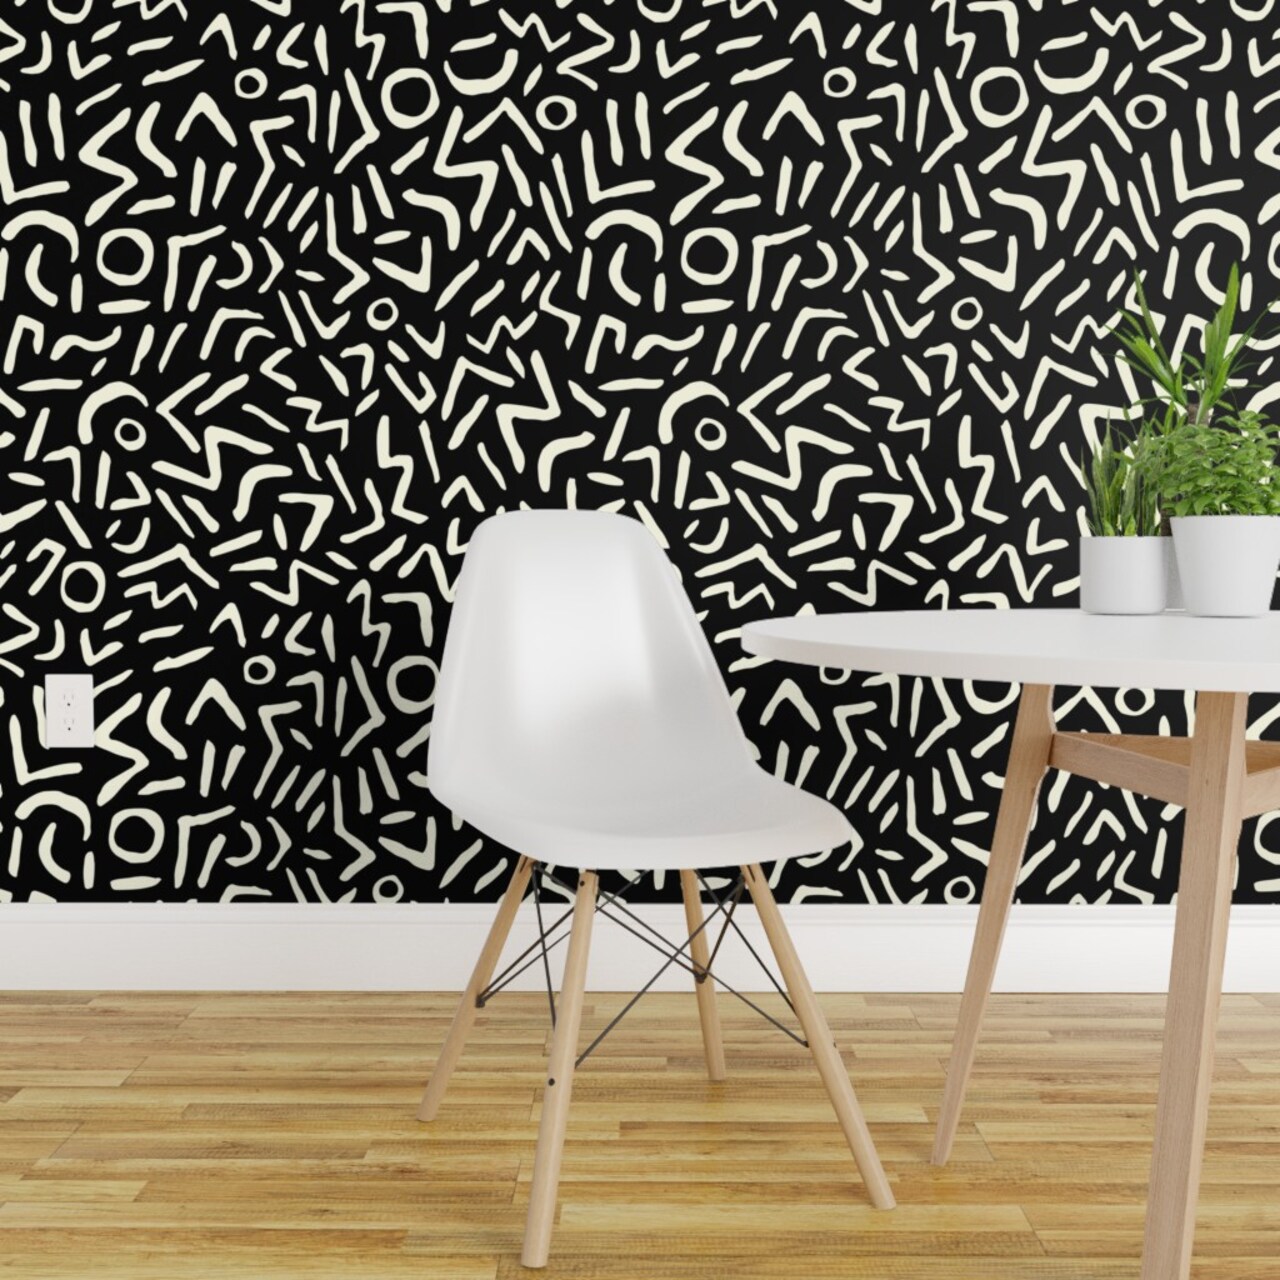 Peel &#x26; Stick Wallpaper 2FT Wide Geometric Abstract Bold Graphic Artistic Tribal Style Black Ivory Custom Removable Wallpaper by Spoonflower